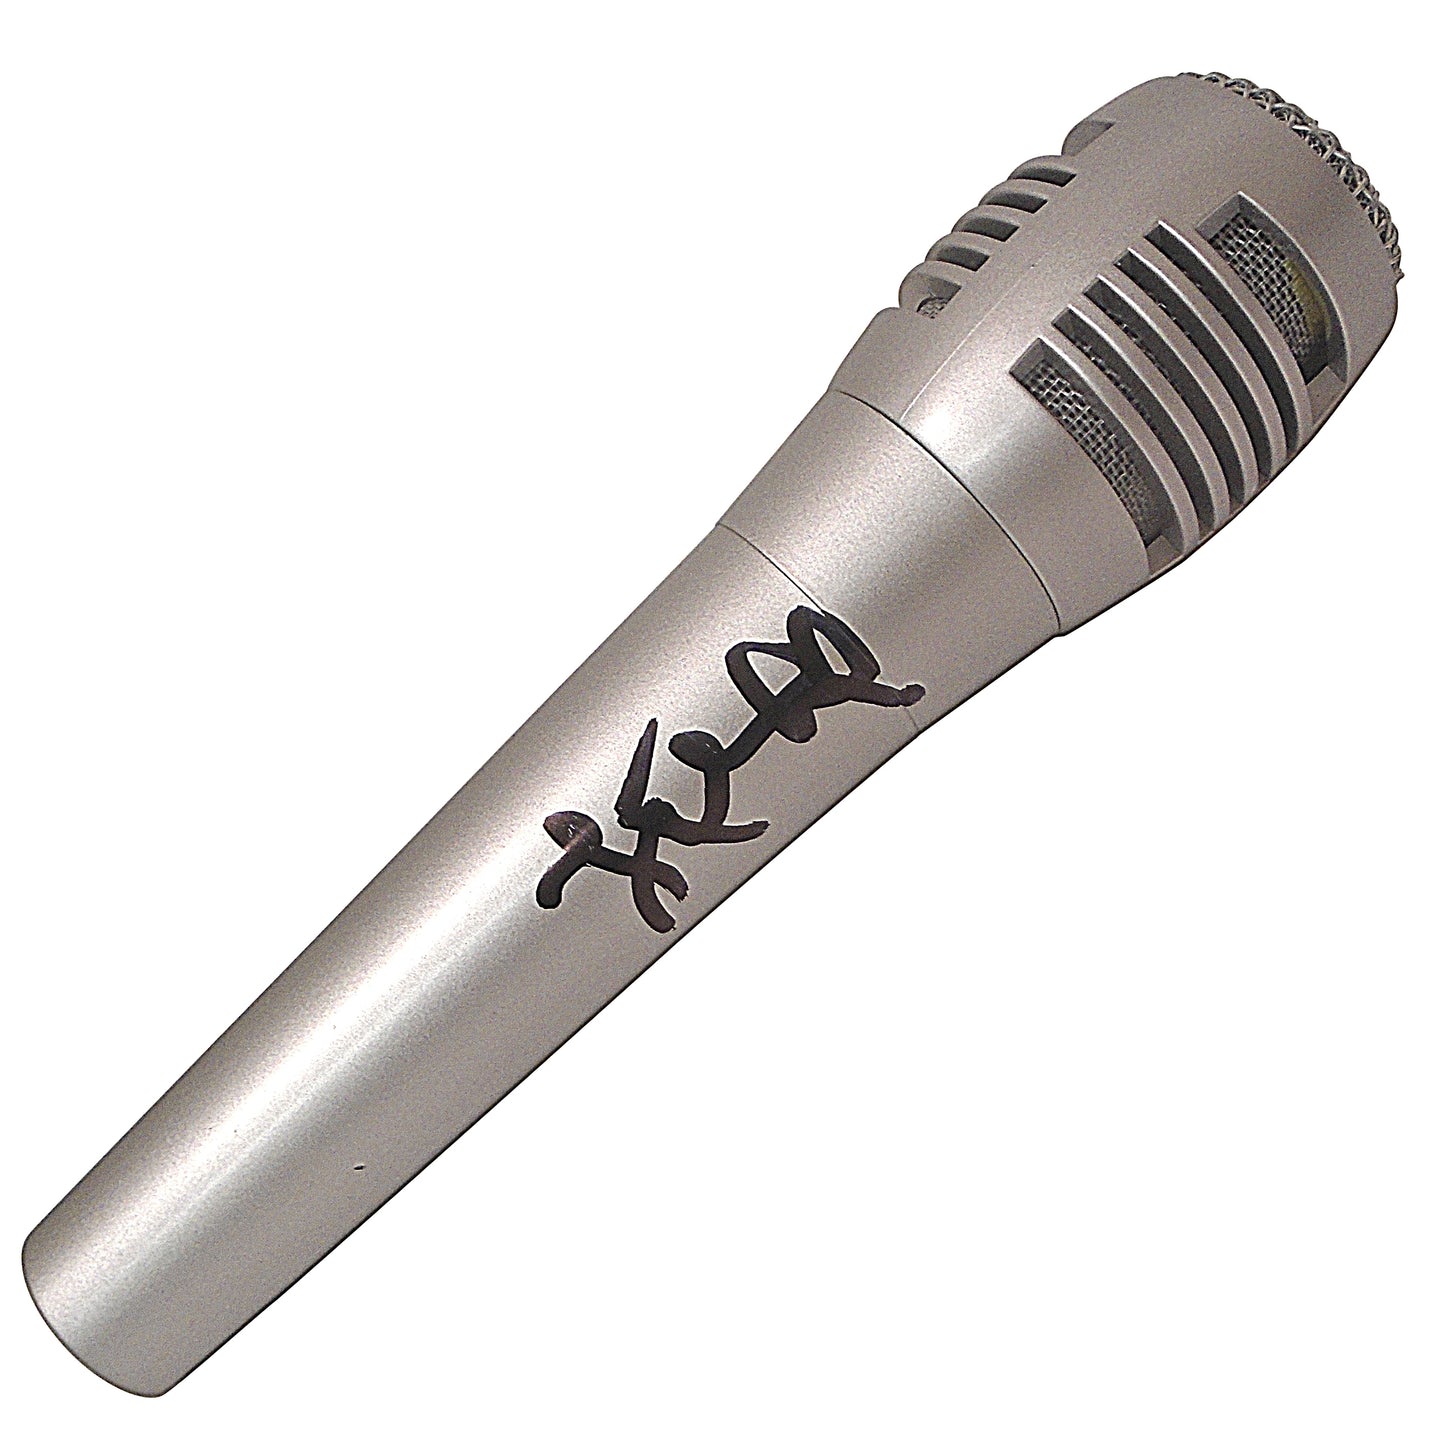 Music-Autographed - Musician Jamie Foxx Signed Pyle Full Size Microphone, Proof Photo - Beckett BAS - 102